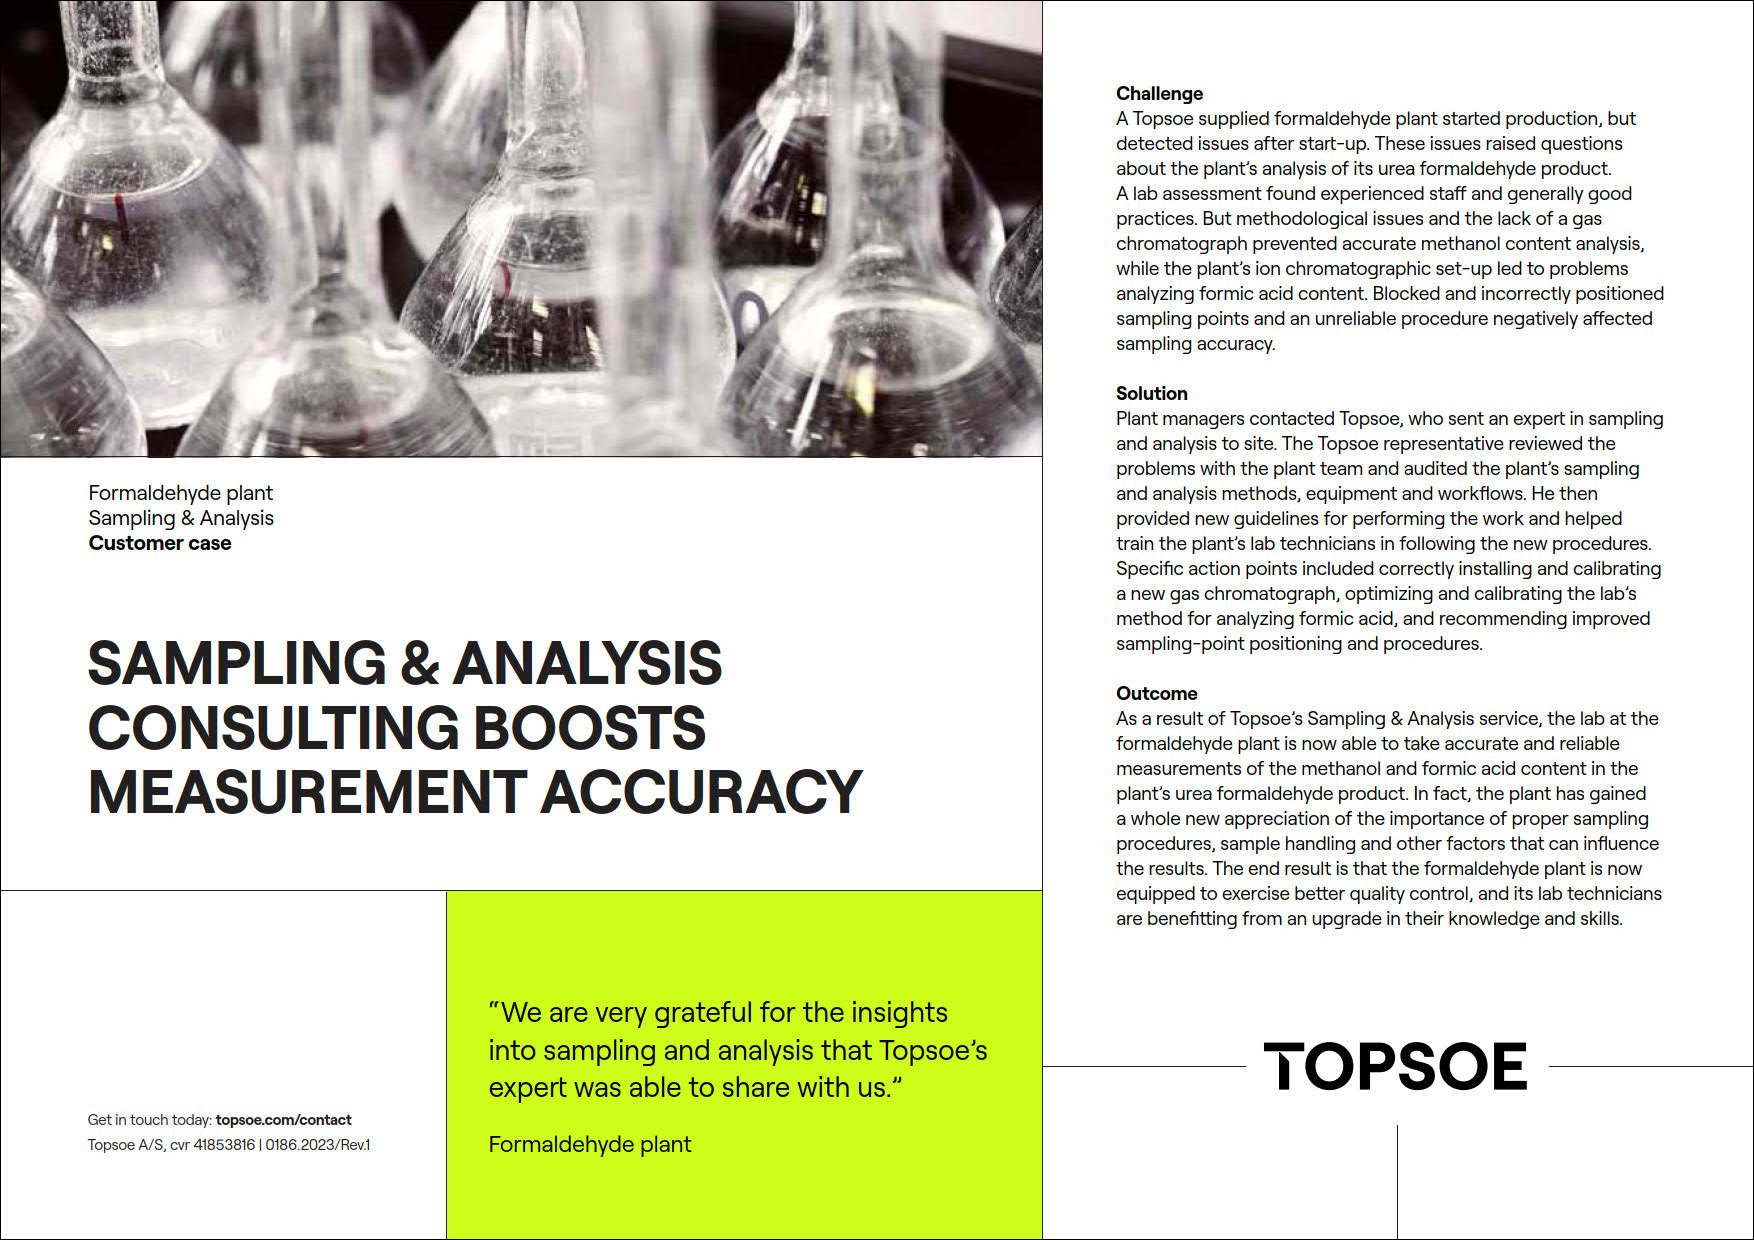 Sampling & Analysis consulting boosts measurement accuracy